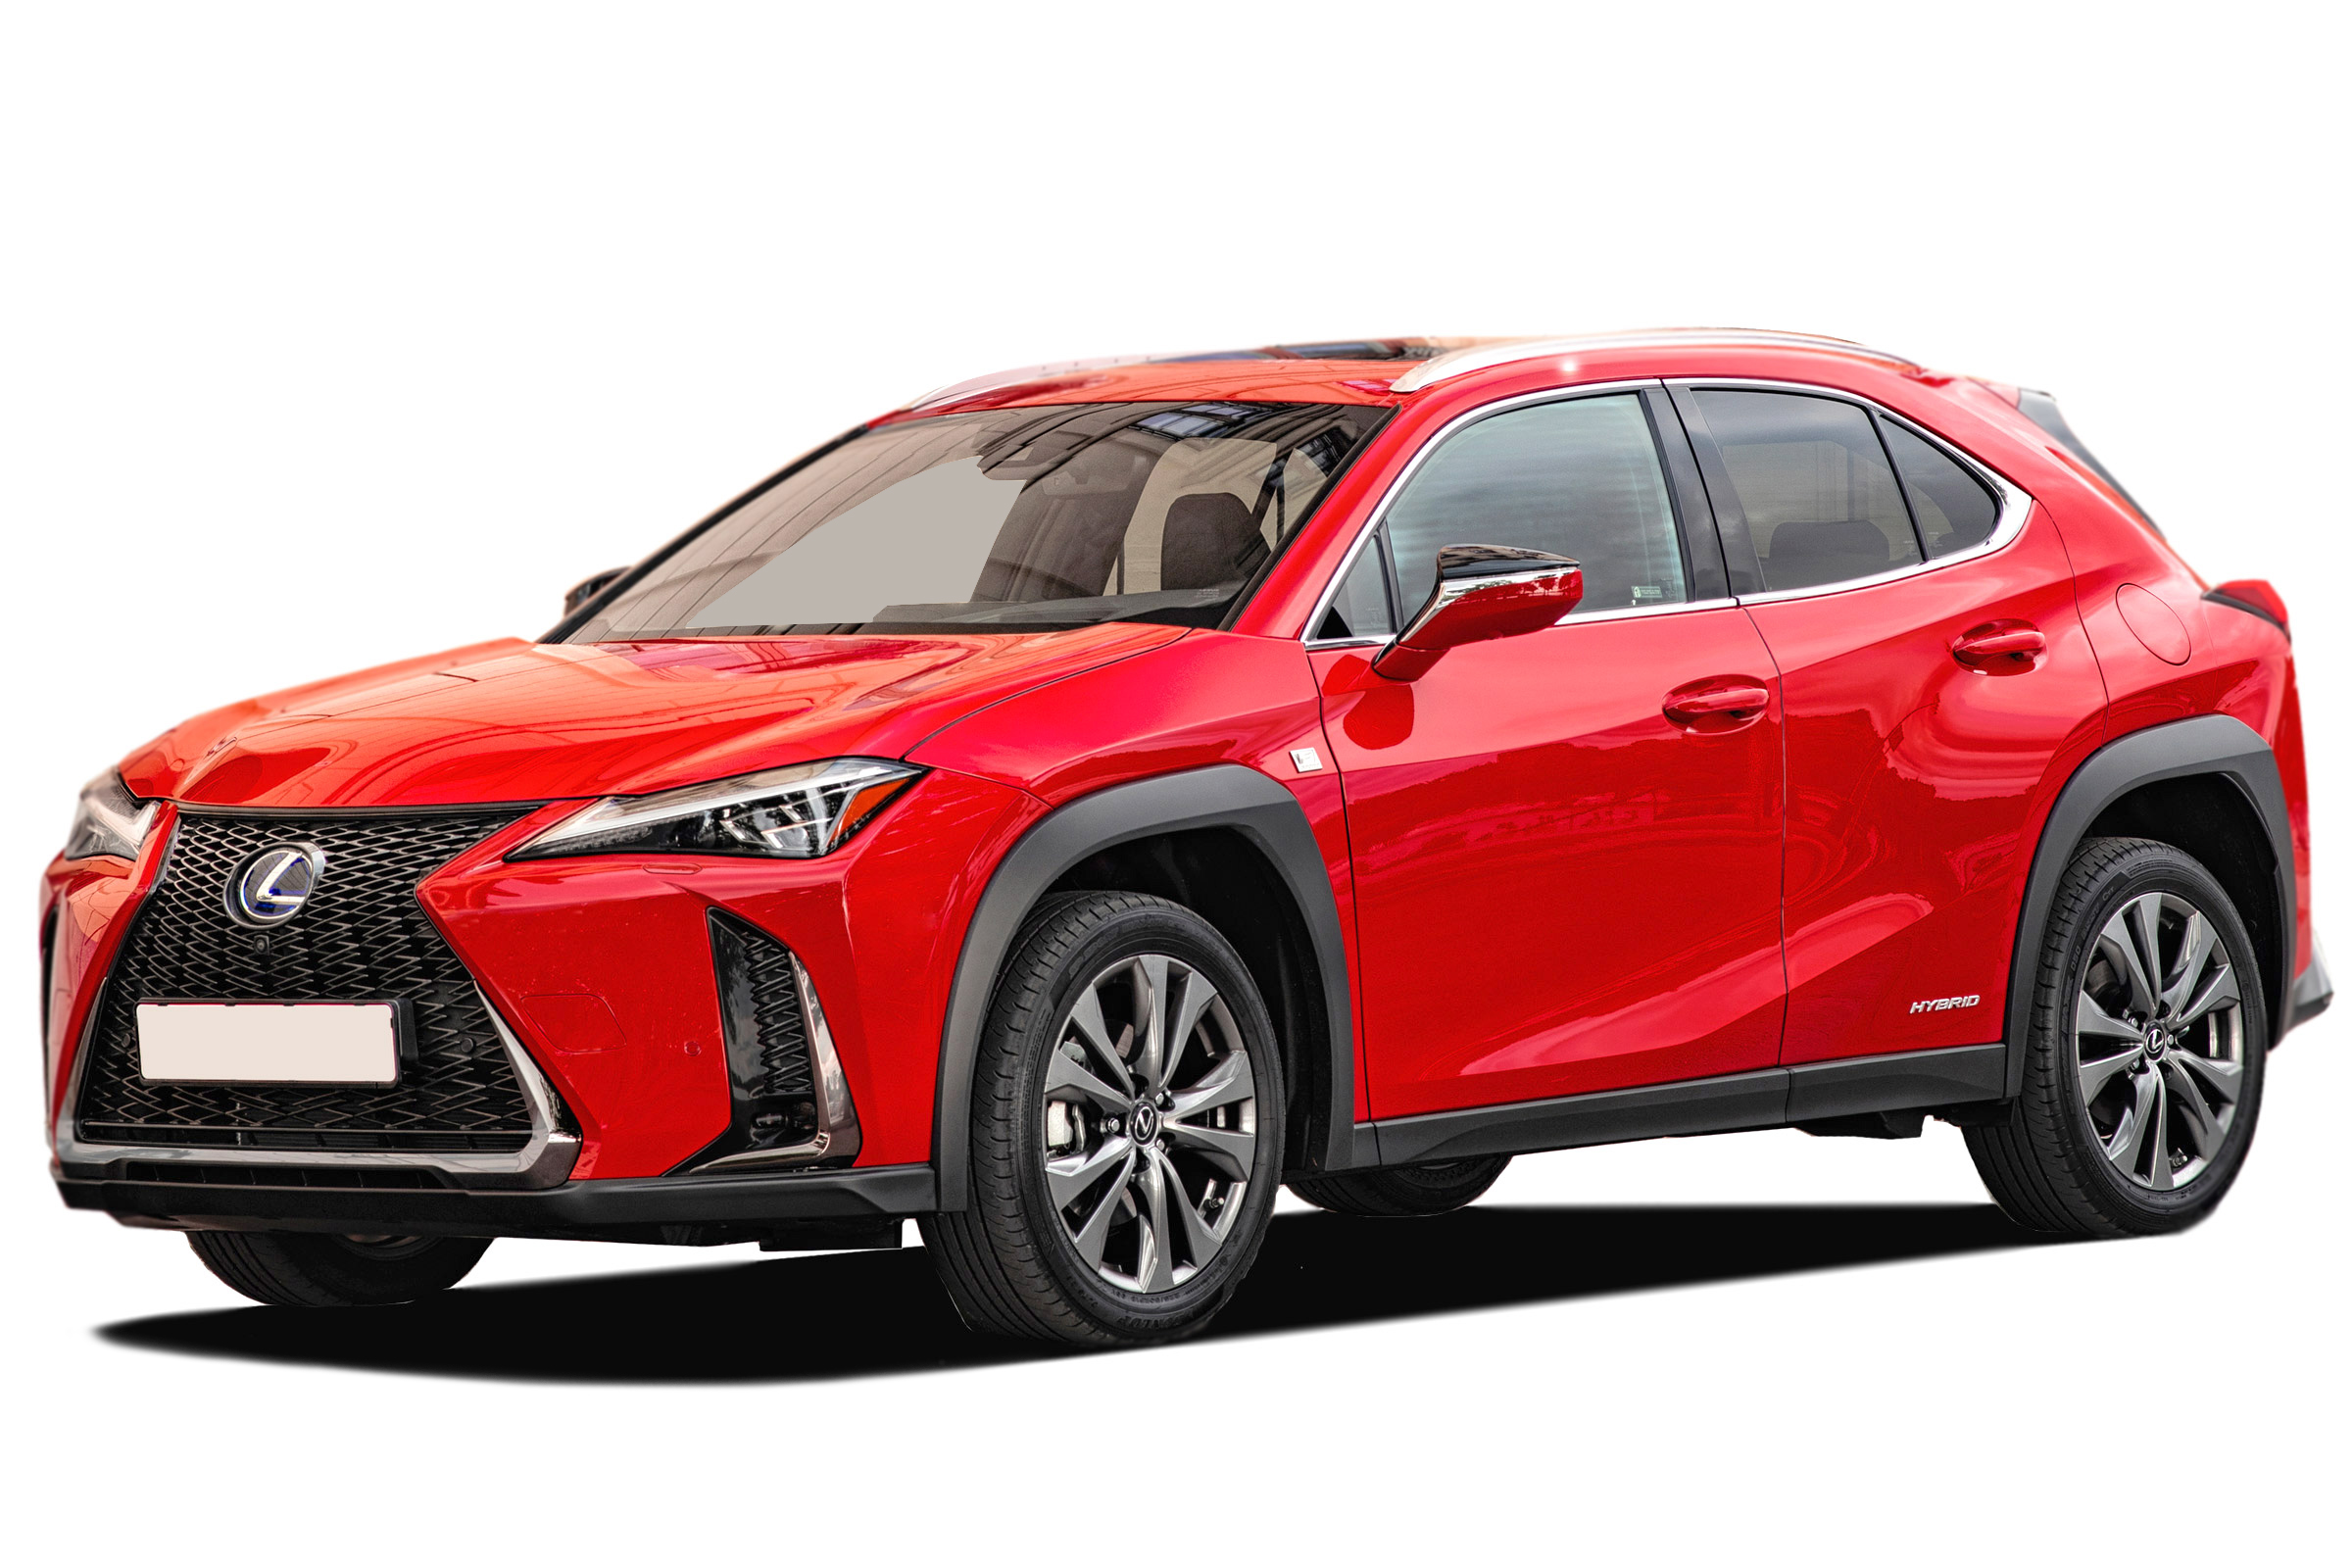 Lexus UX SUV Engines, drive & performance 2020 review